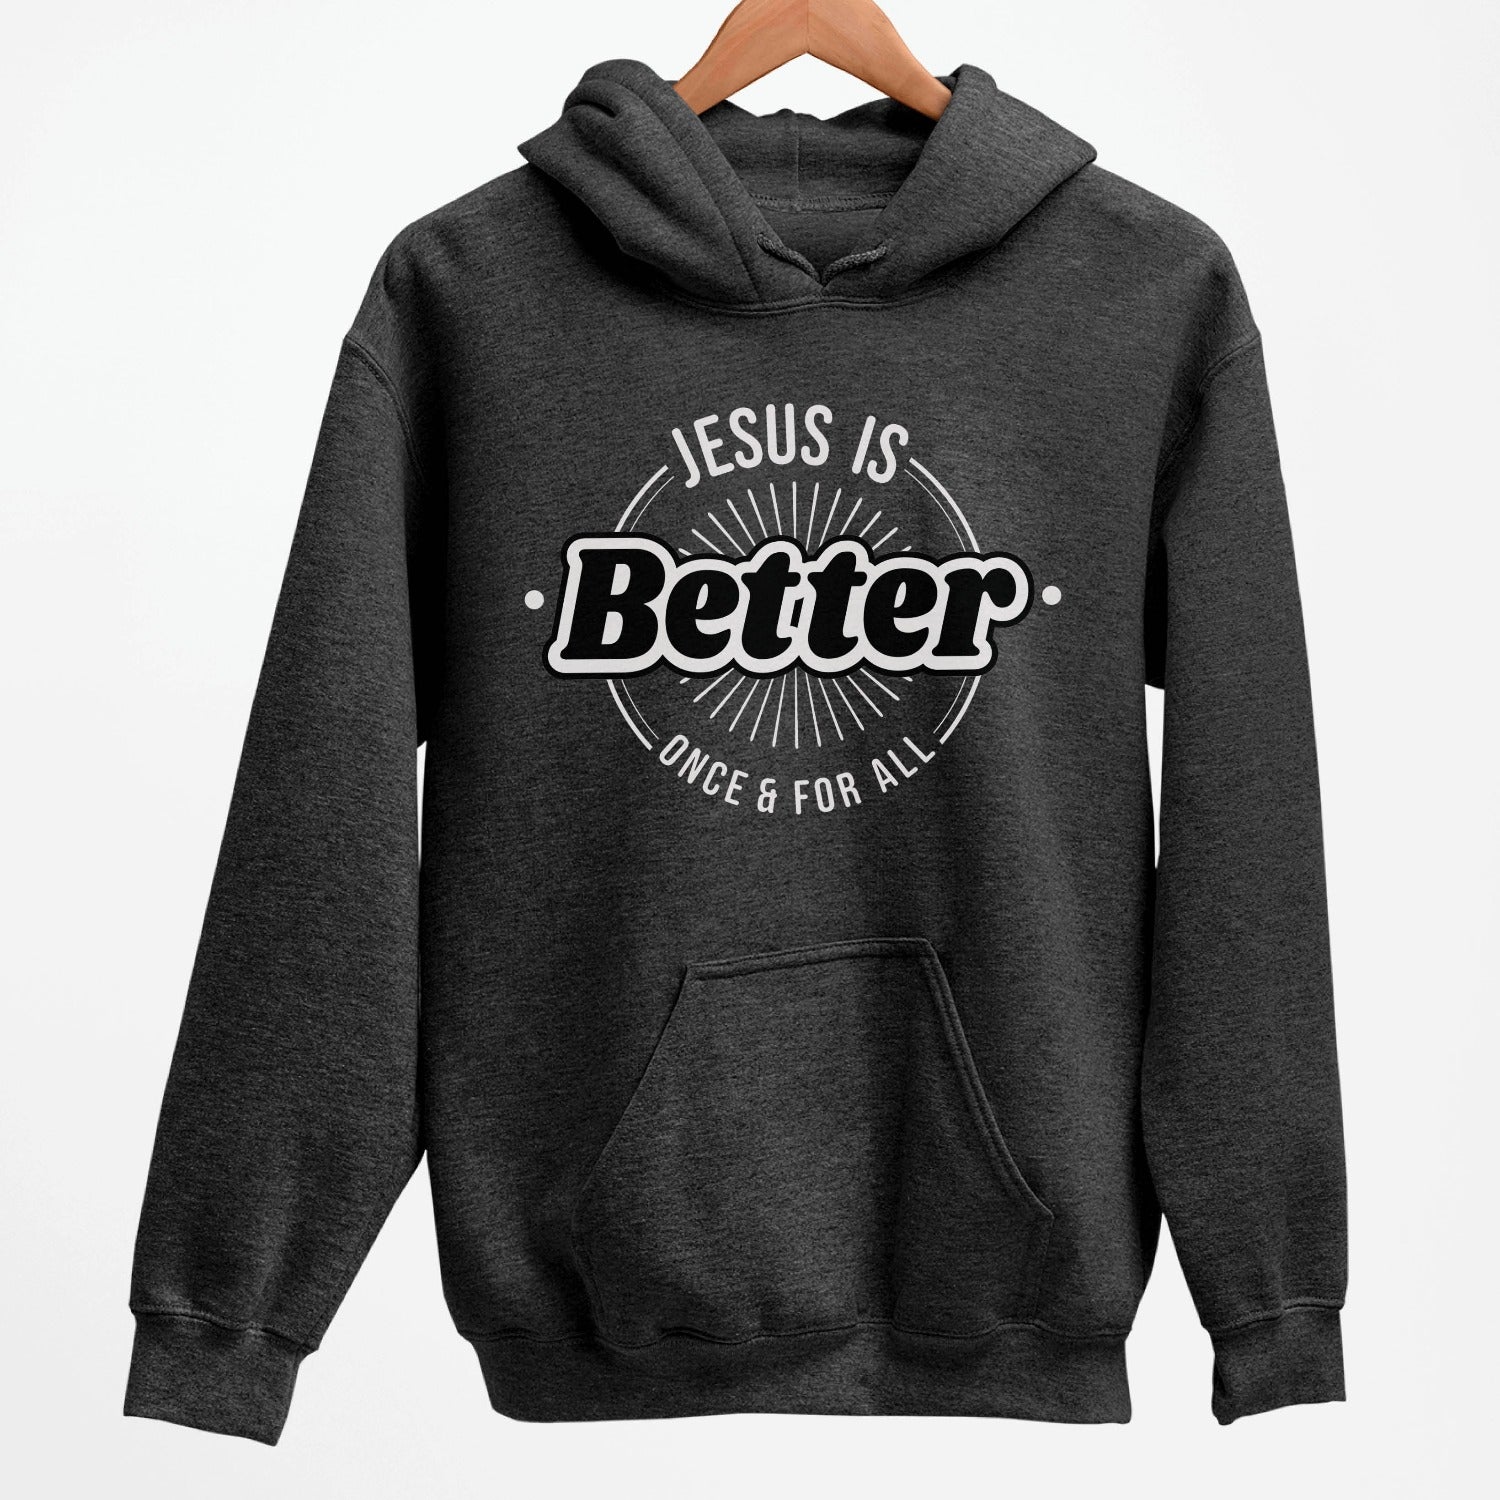 Heather Dark Gray color faith-based oversized cozy hoodie with "Jesus is BETTER - Once and For All" logo style design in black and white, created for Christian men and women